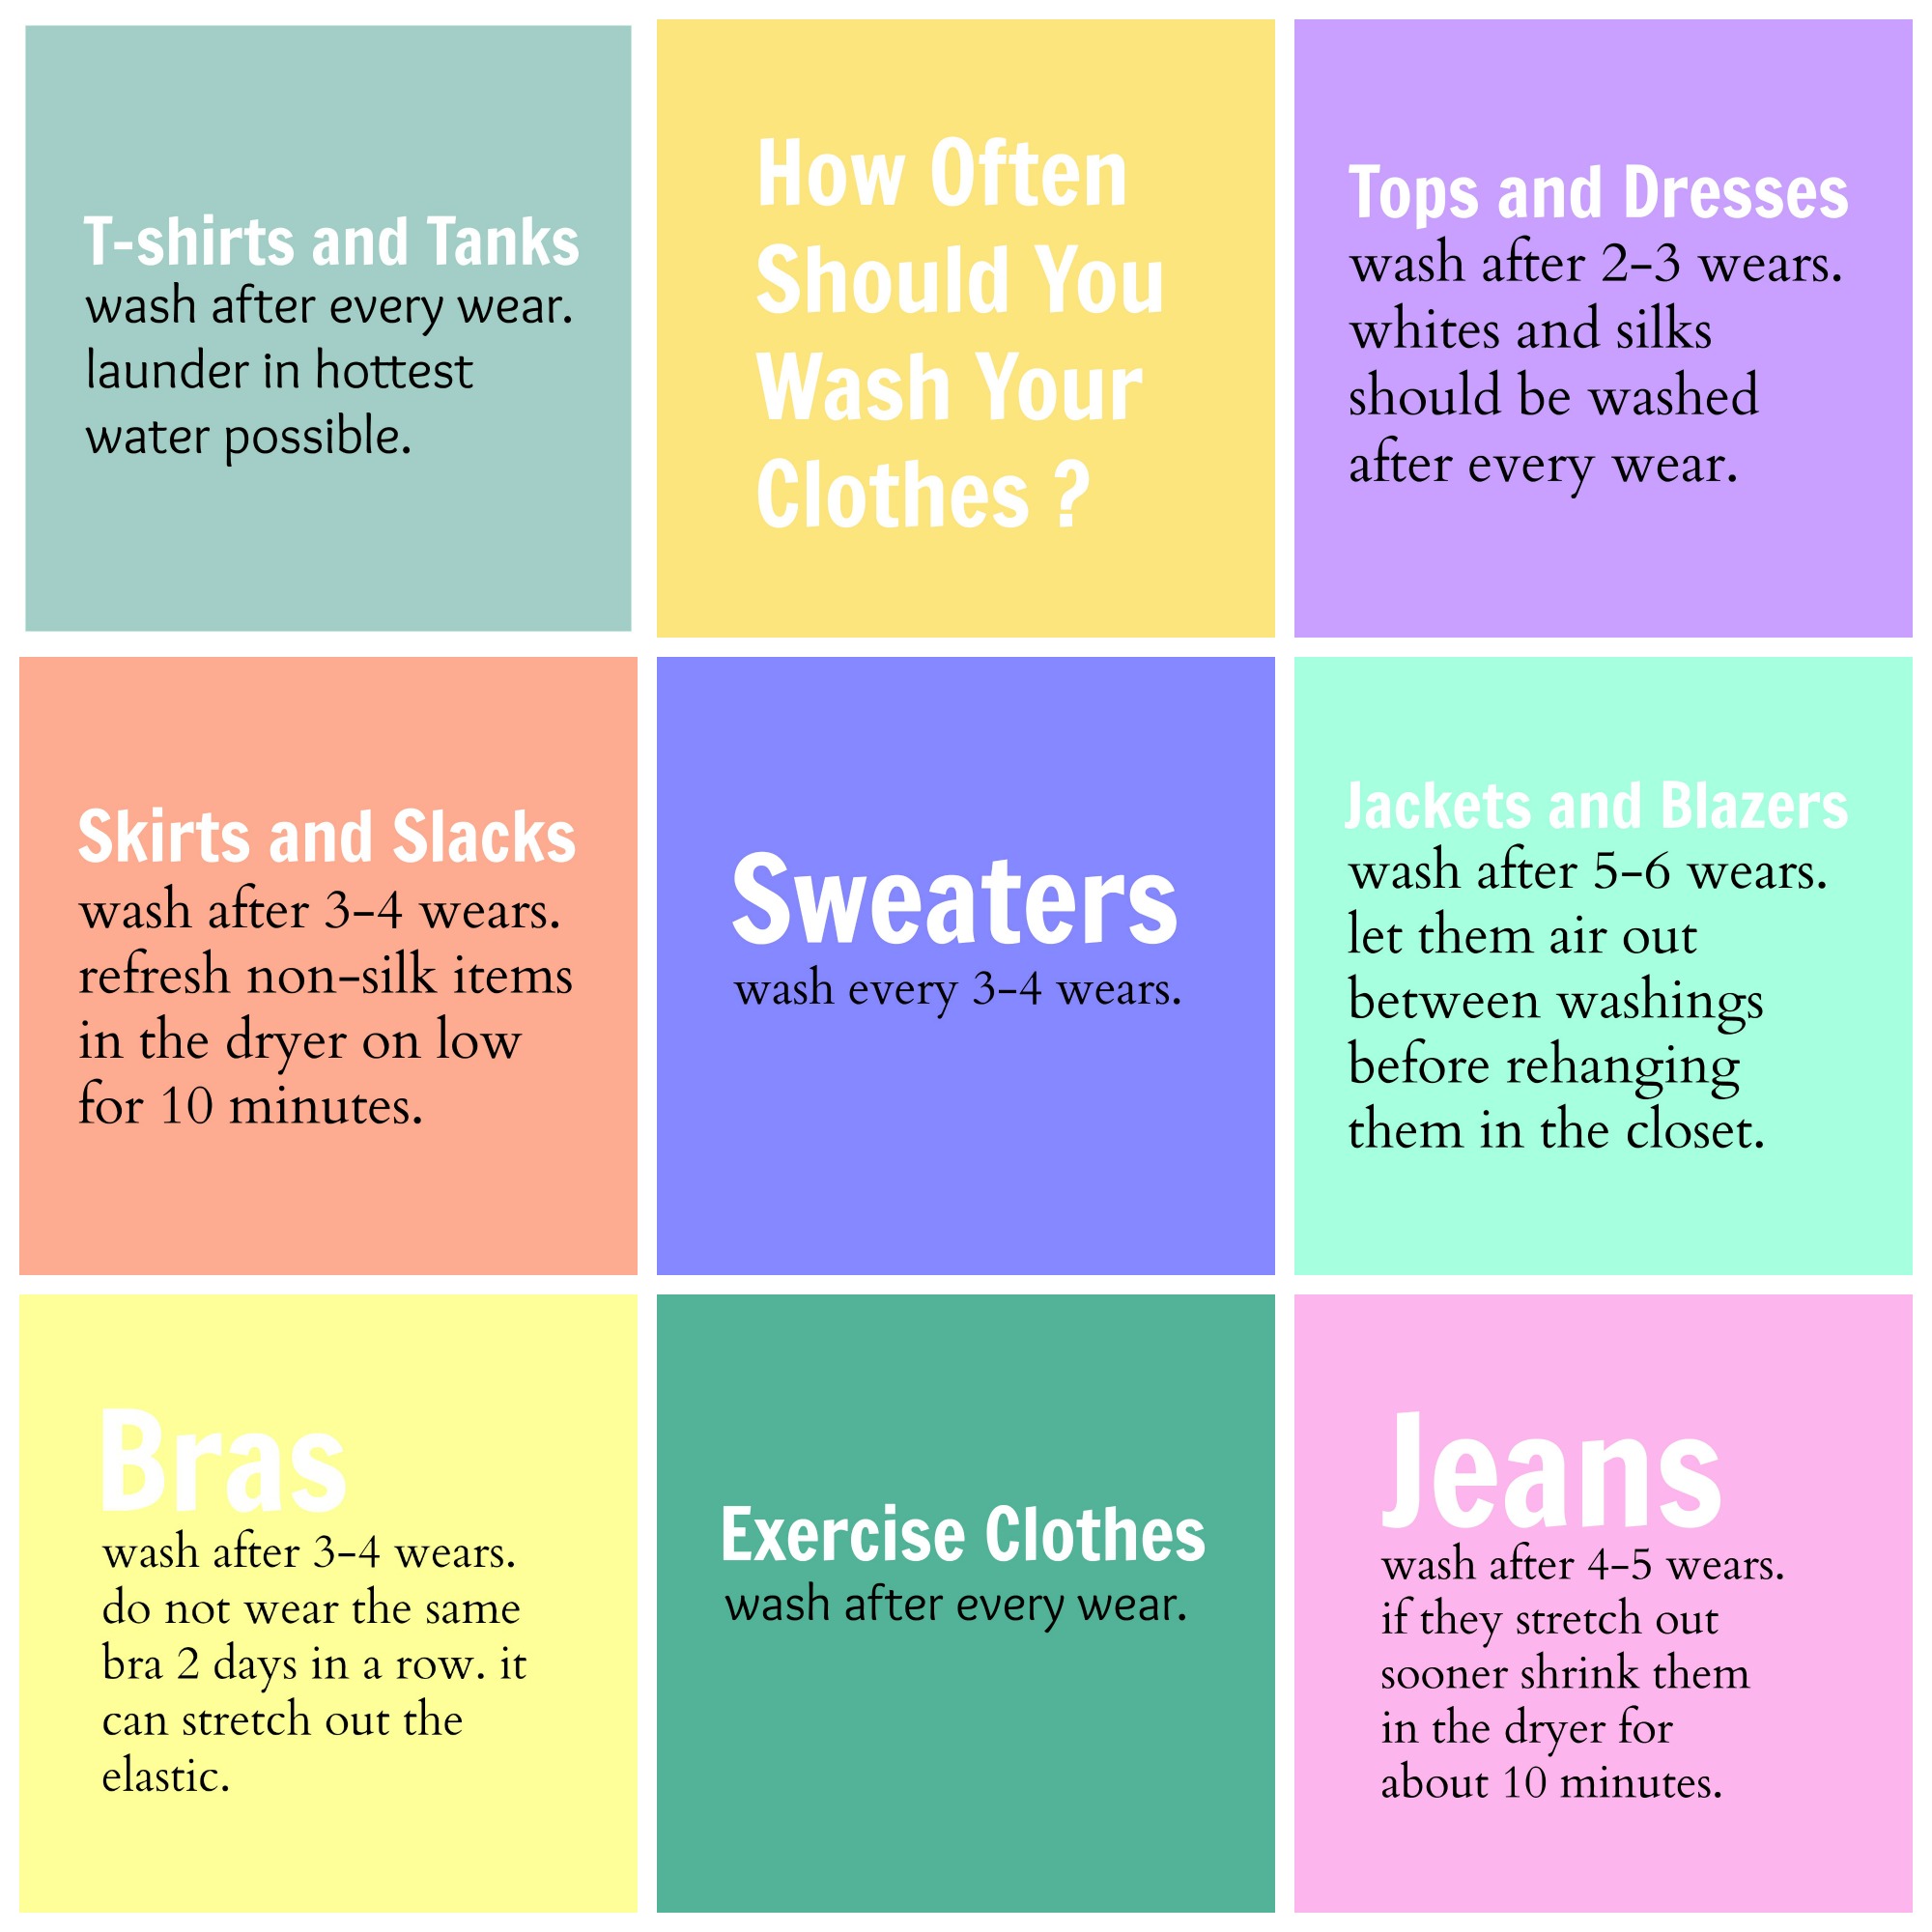 clothes-washing-collage.jpg